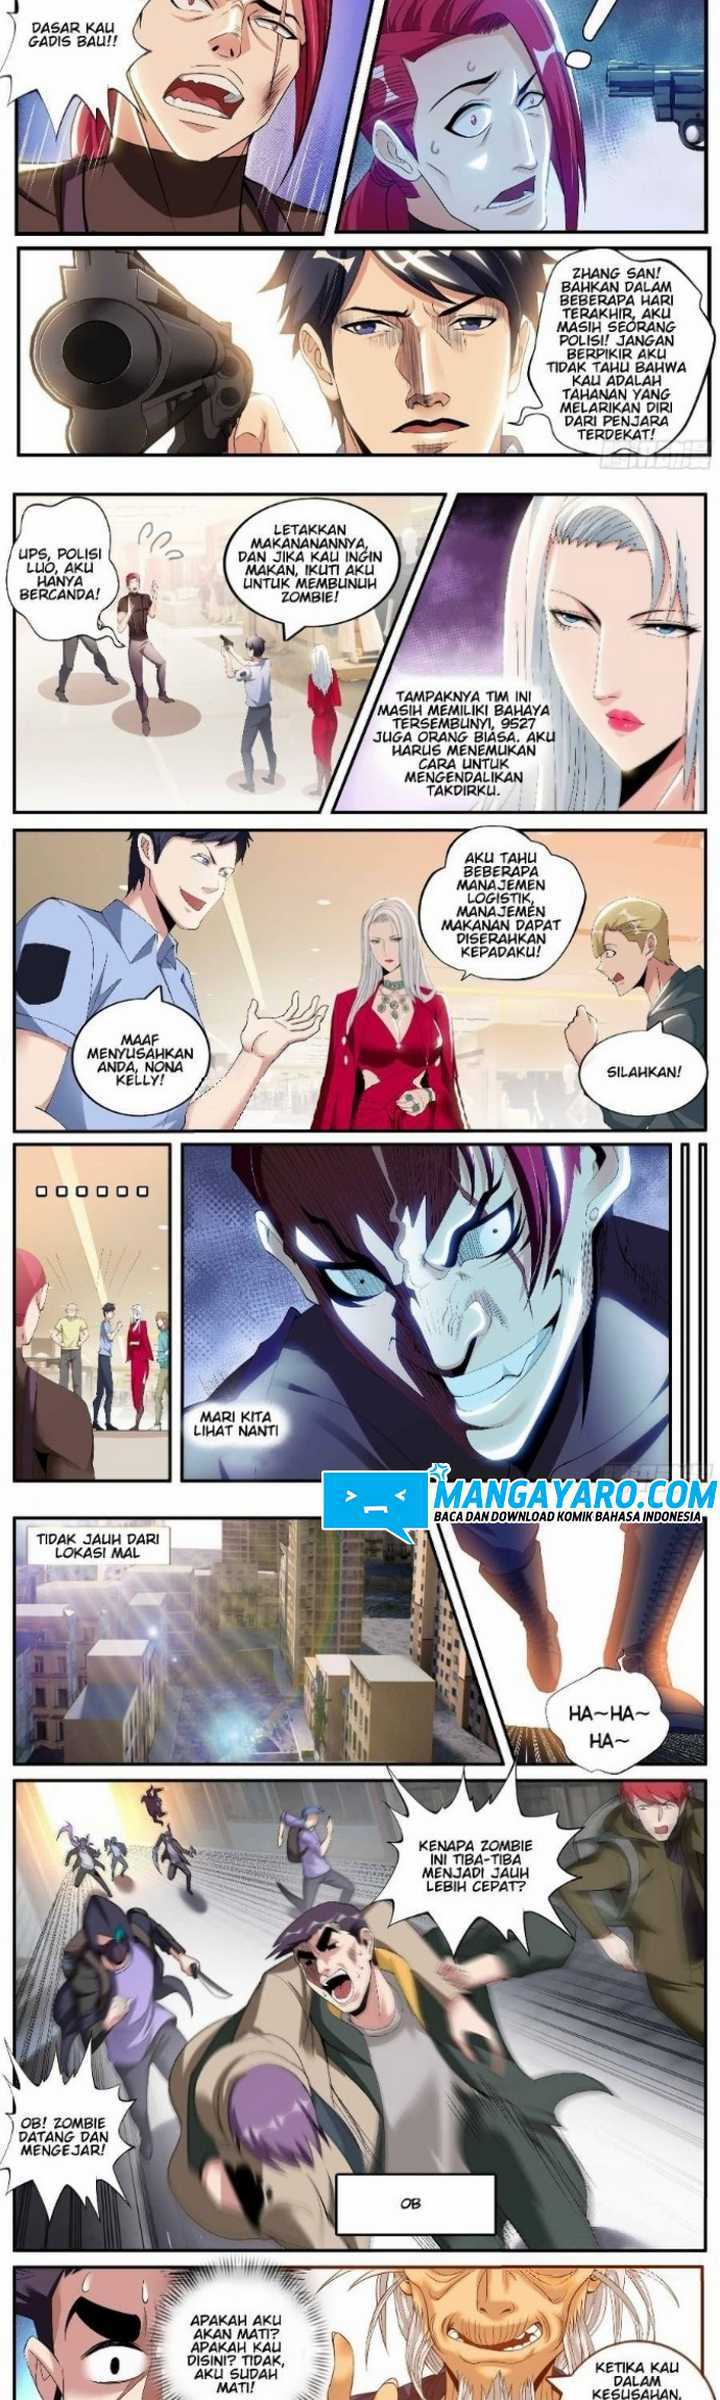 I Have An Apocalyptic Dungeon Chapter 16 bahasa indonesia